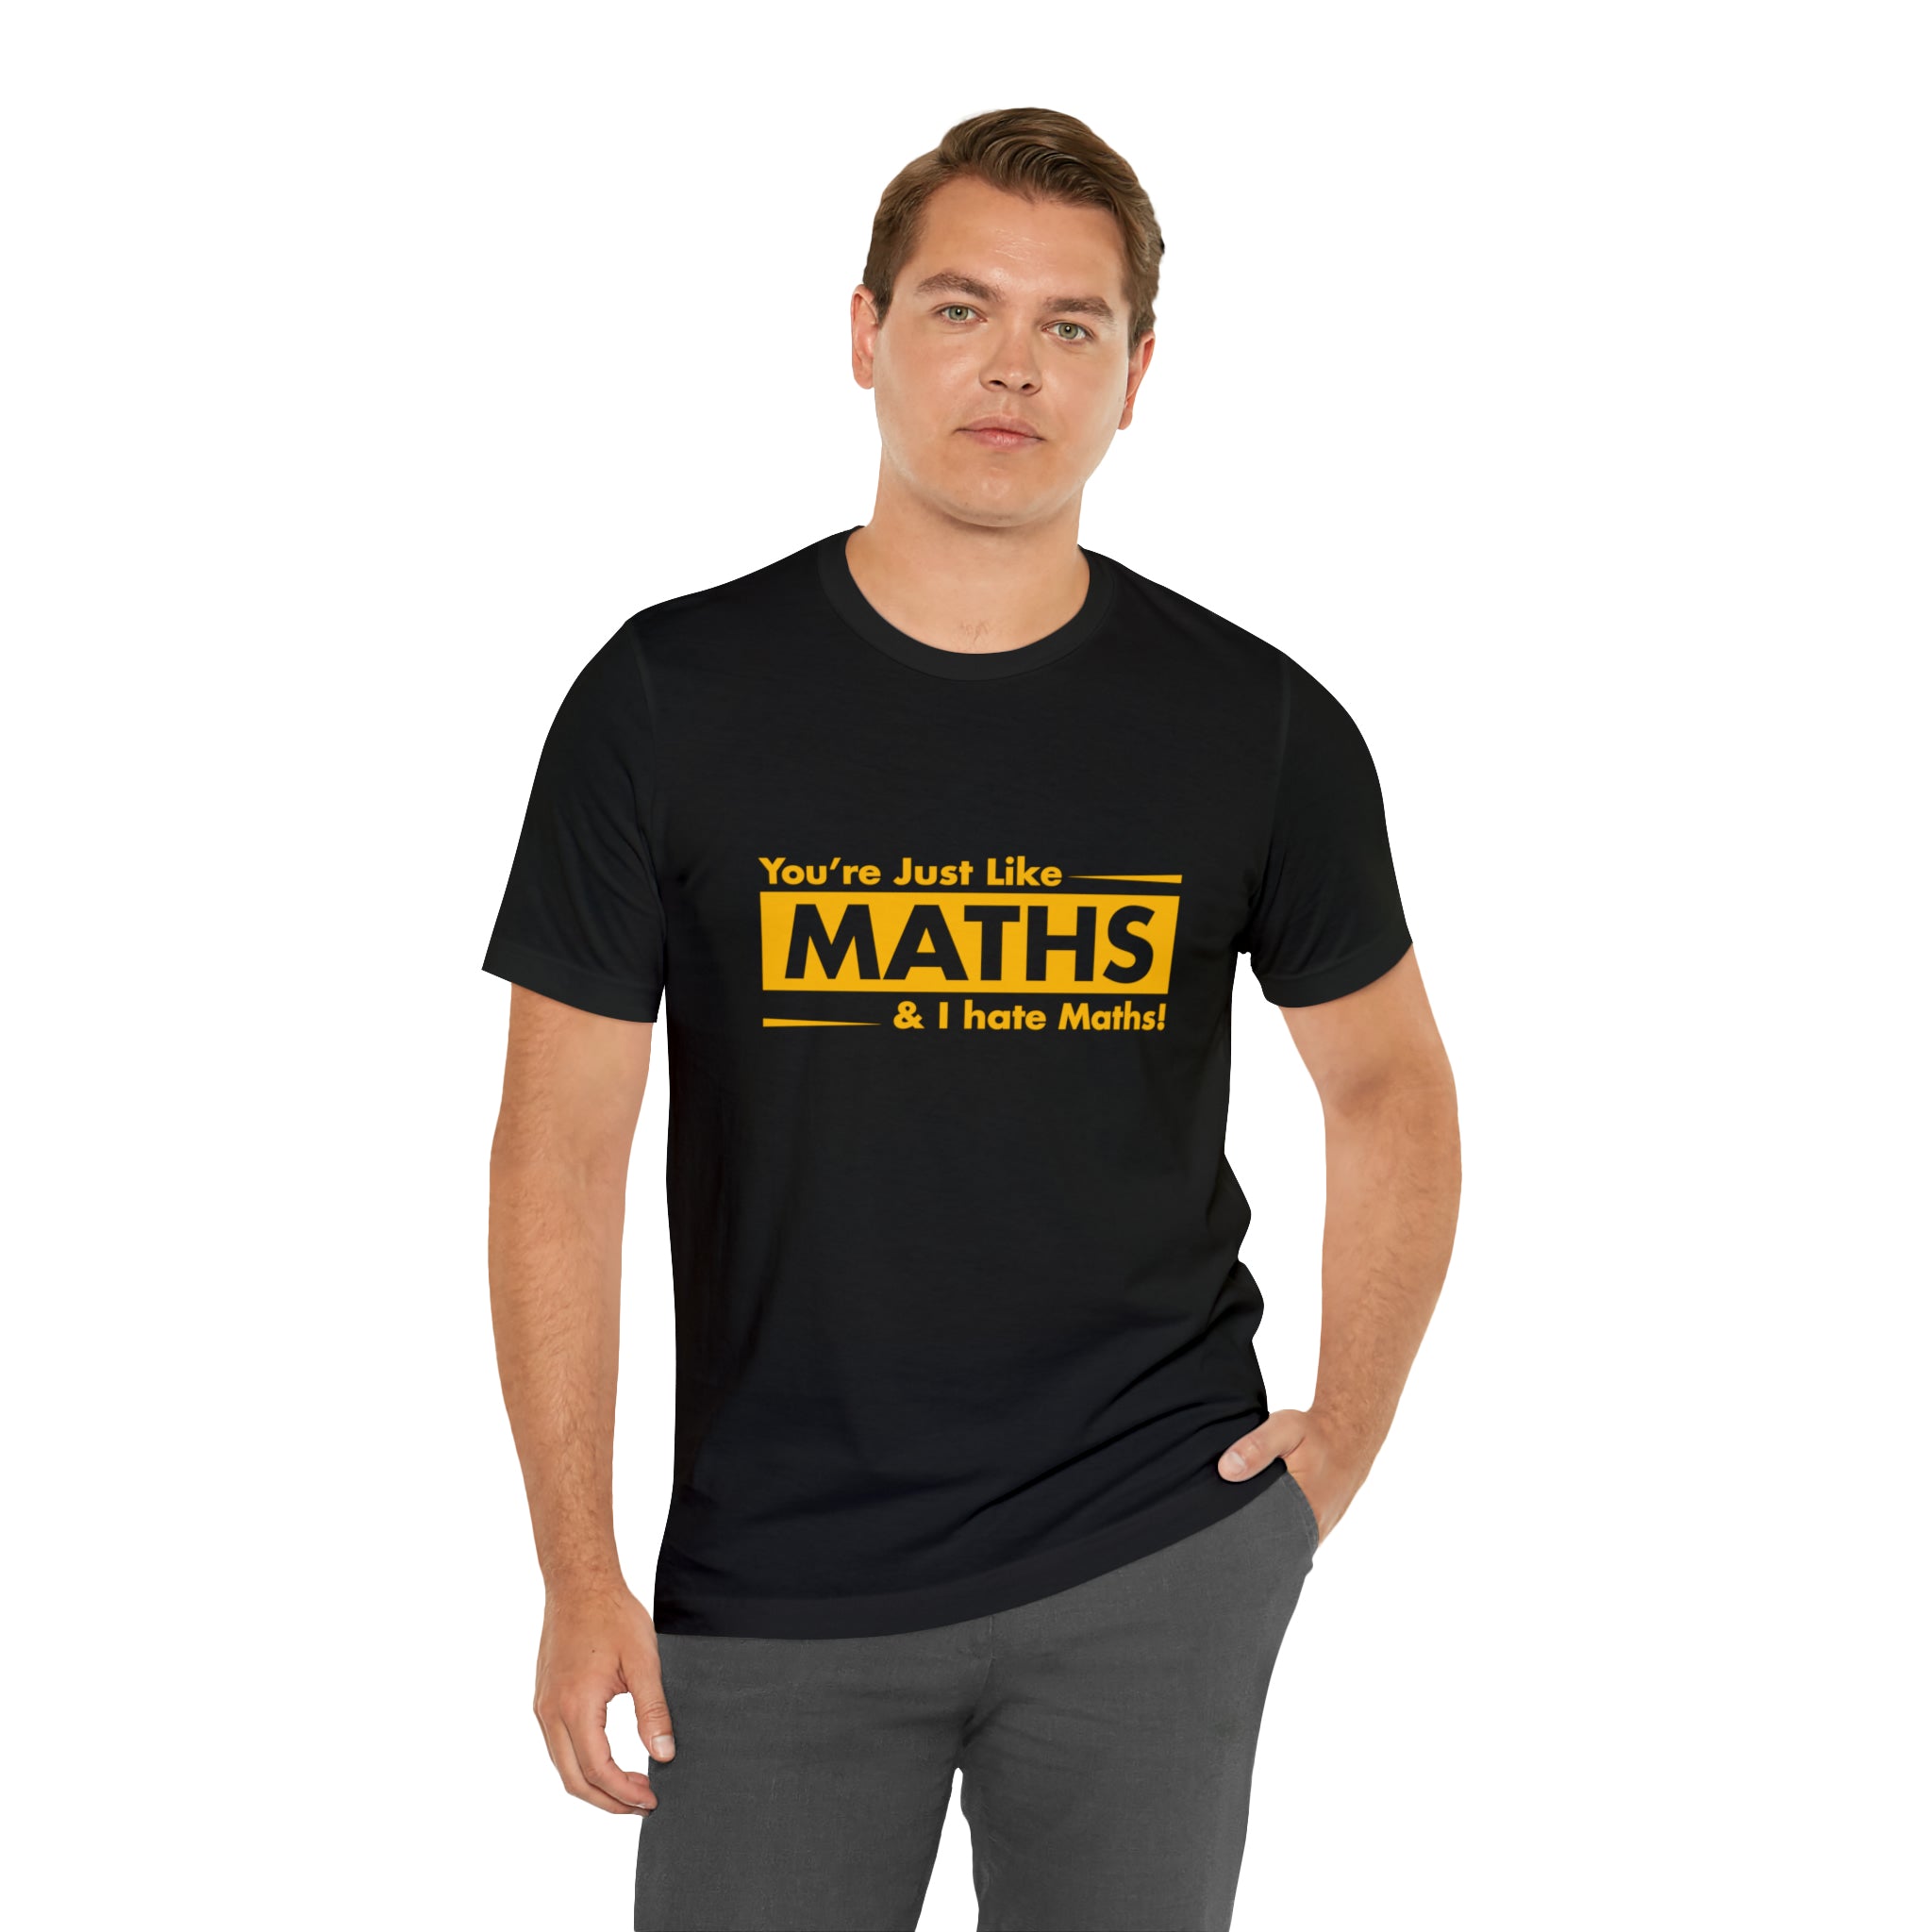 A man with a great fashion sense wearing a black "You are just like maths and I hate maths" T-shirt.